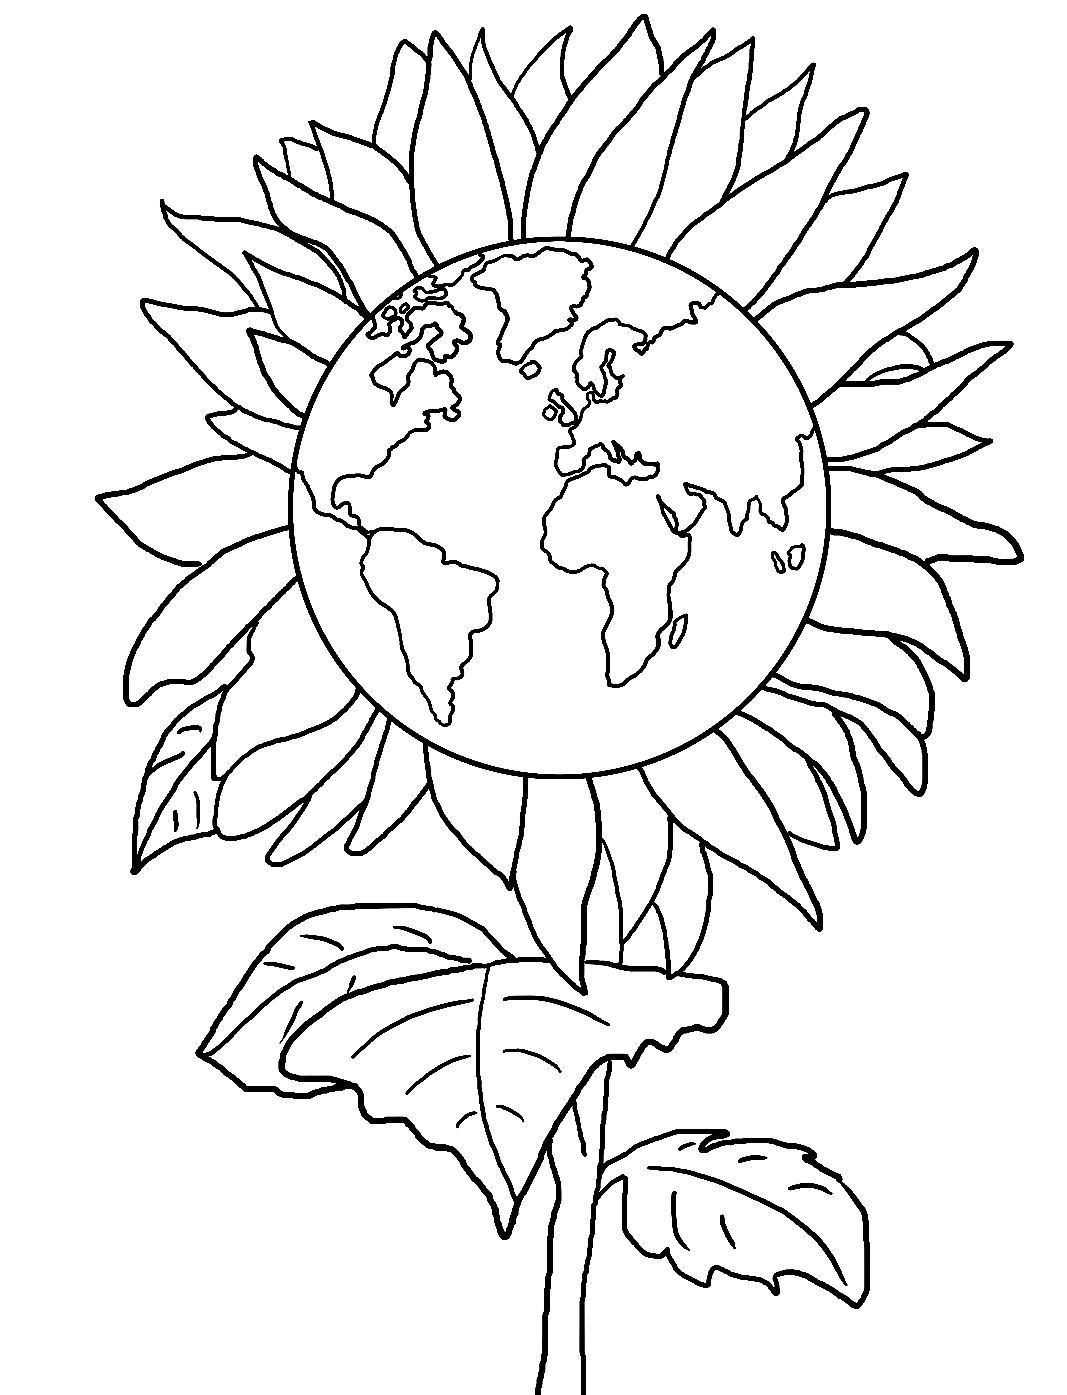 Sunflower Earth Day Coloring Pages